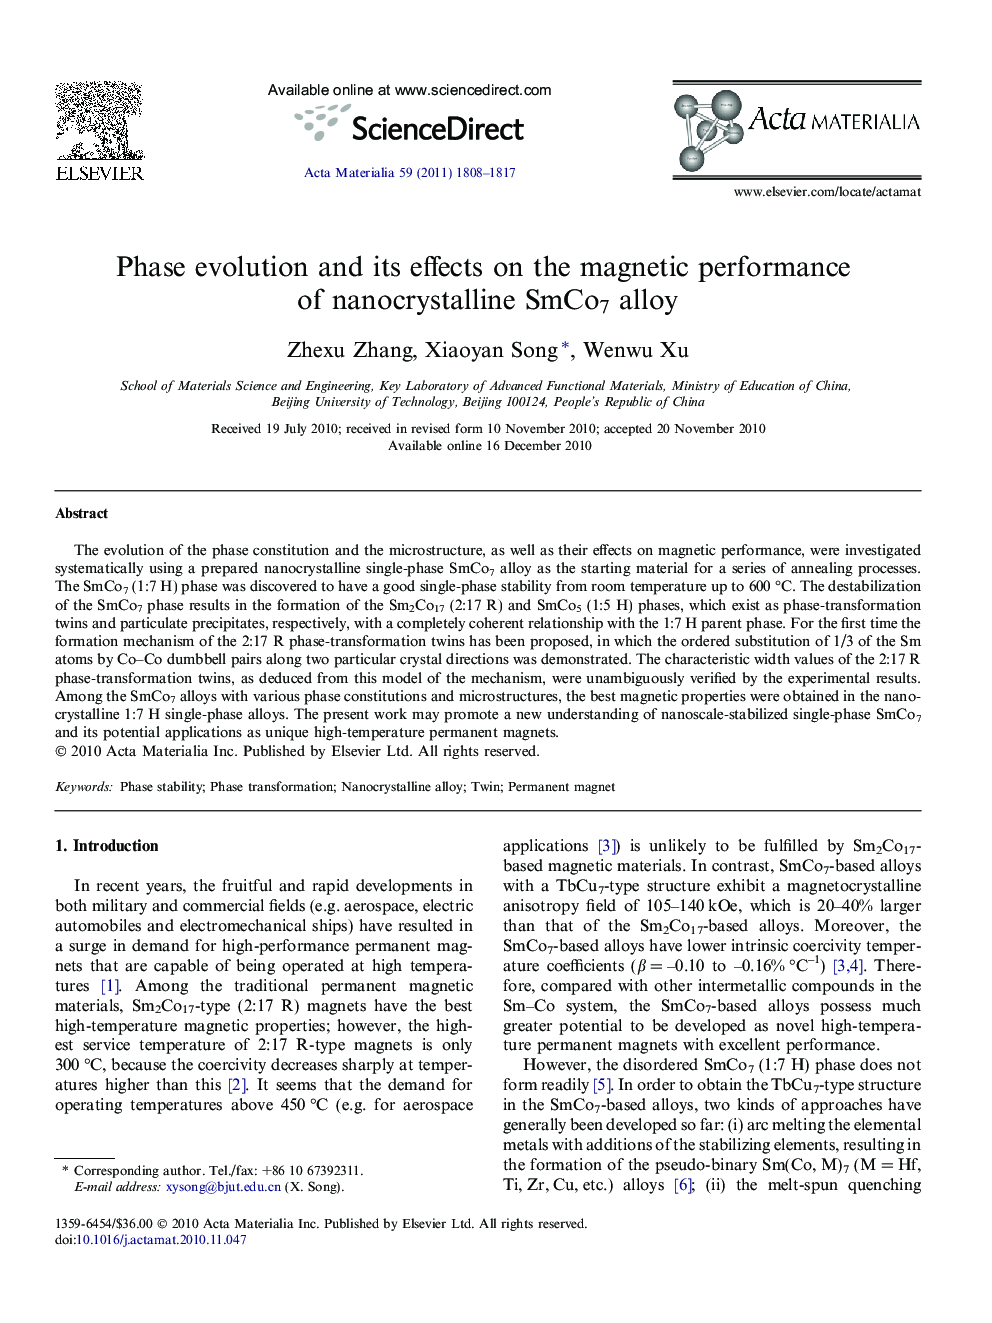 Phase evolution and its effects on the magnetic performance of nanocrystalline SmCo7 alloy